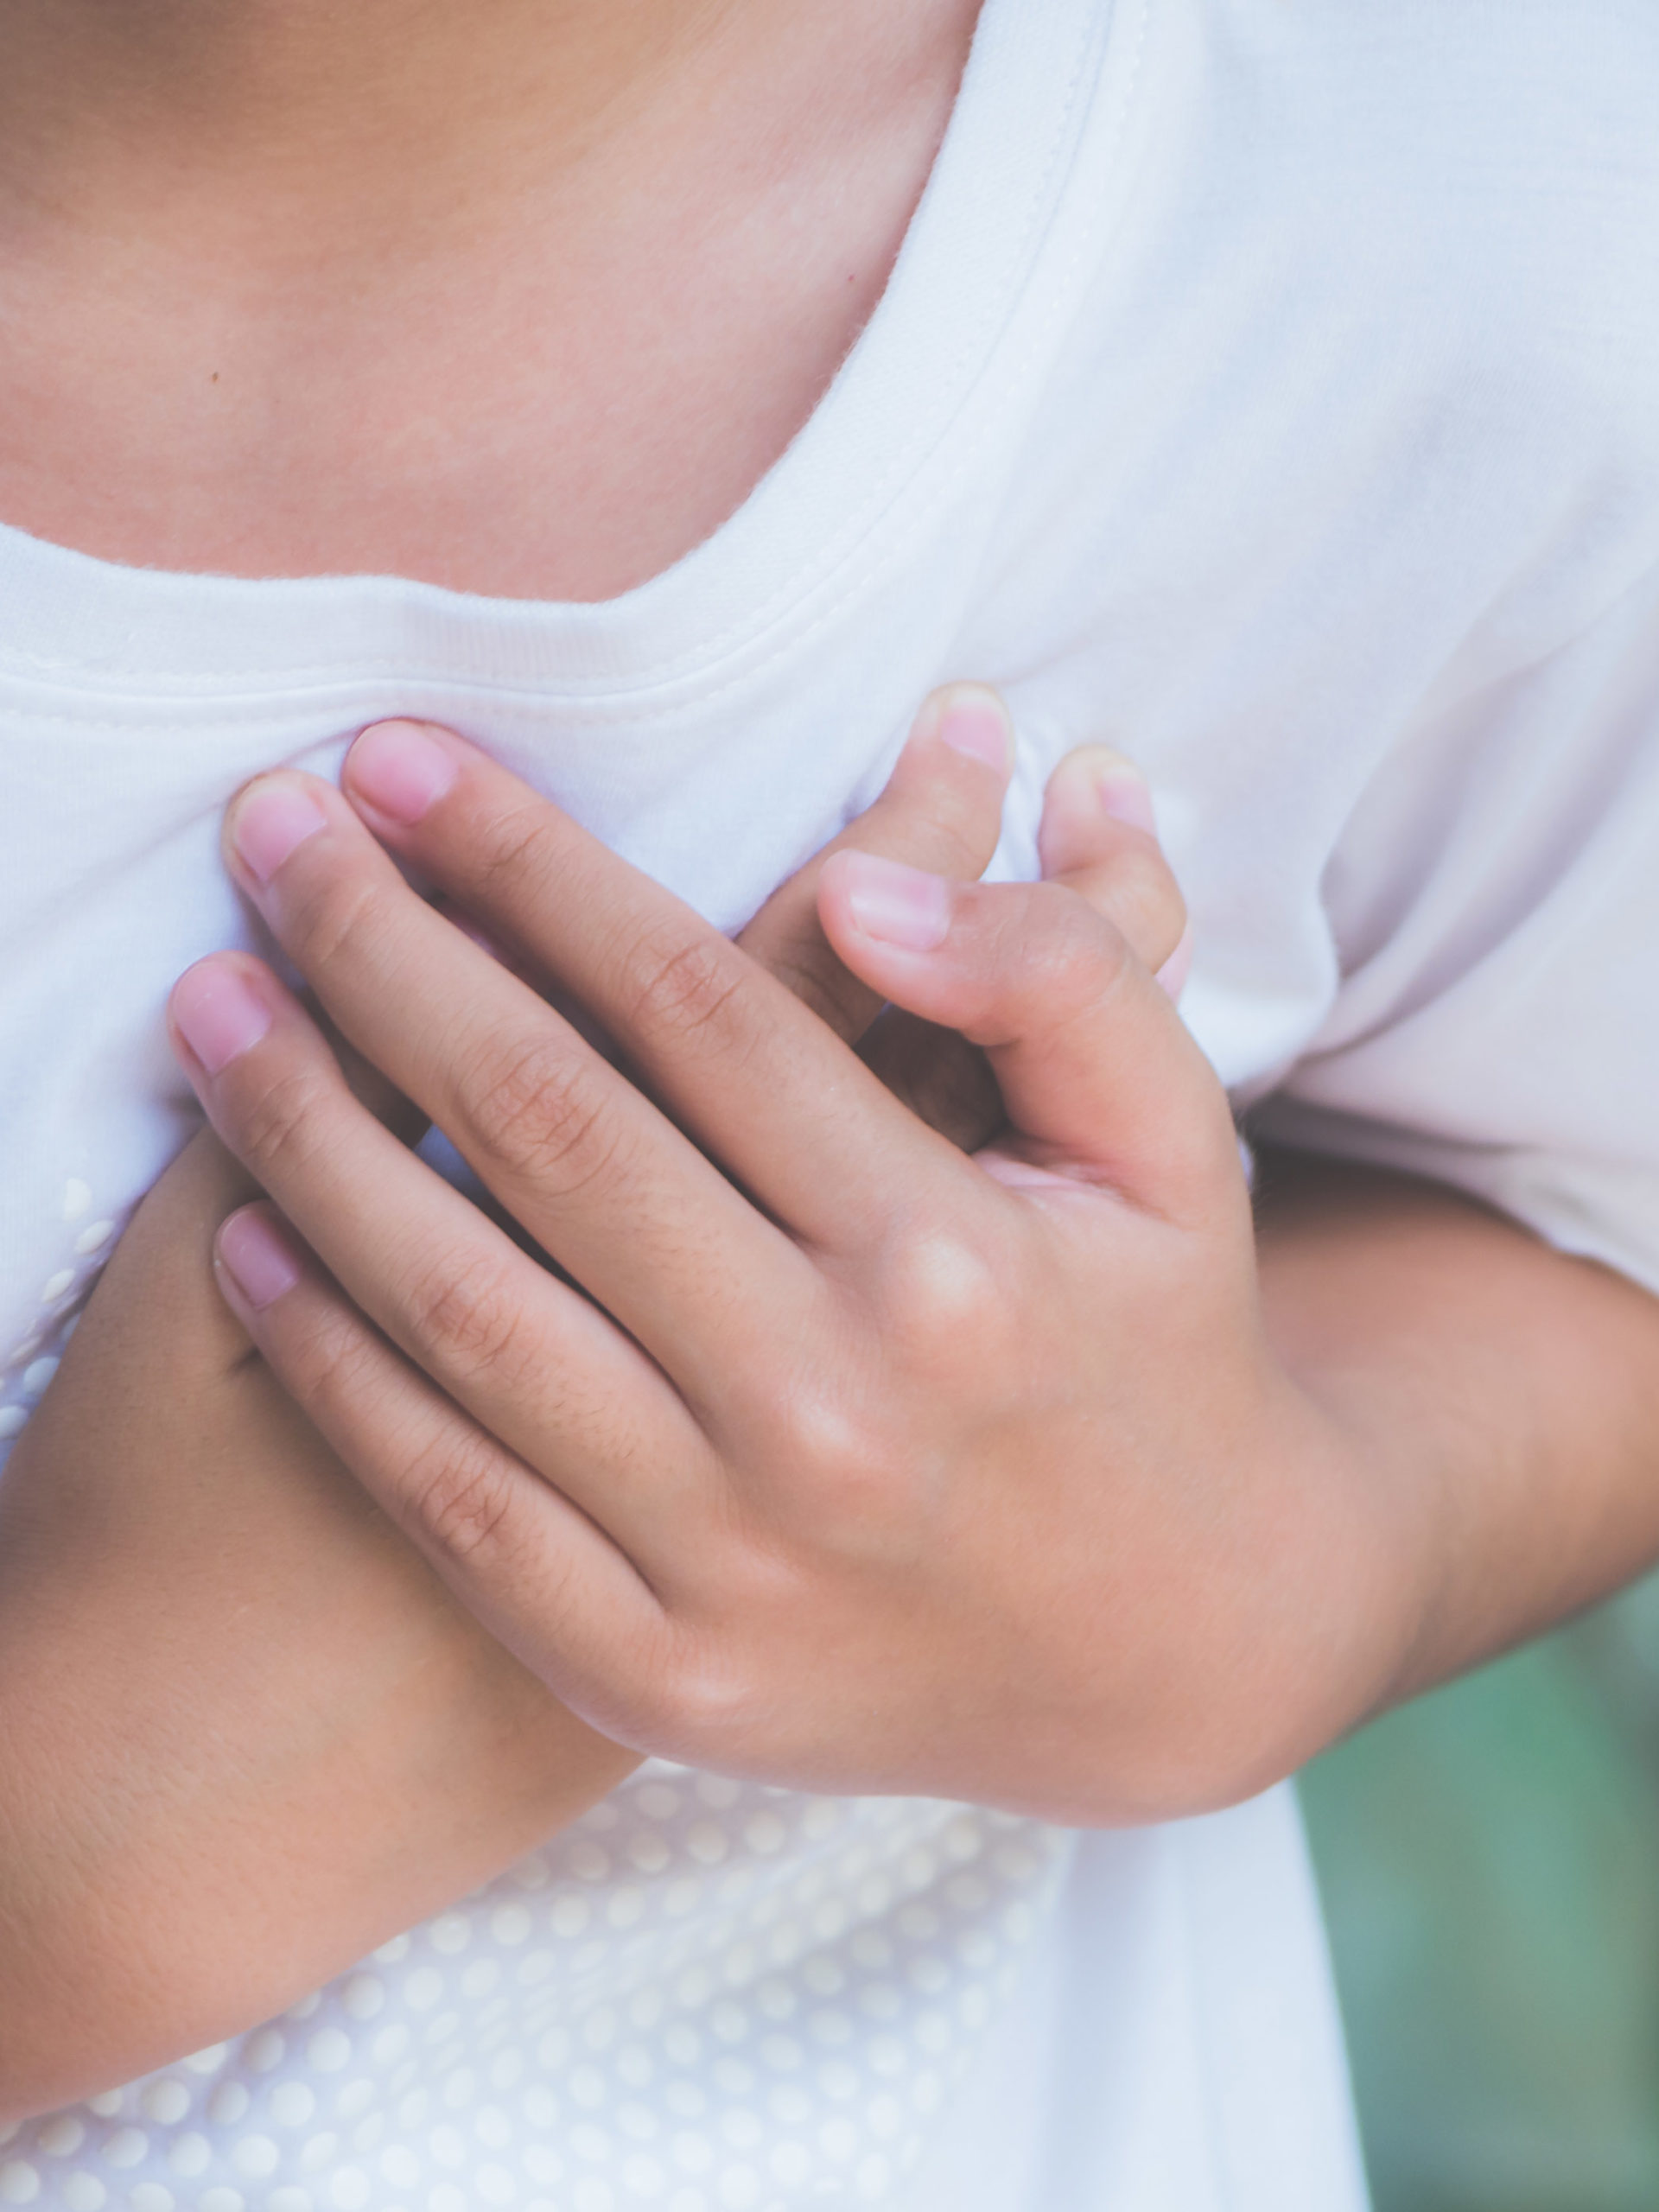 boy with chest pain holding his hands to his heart